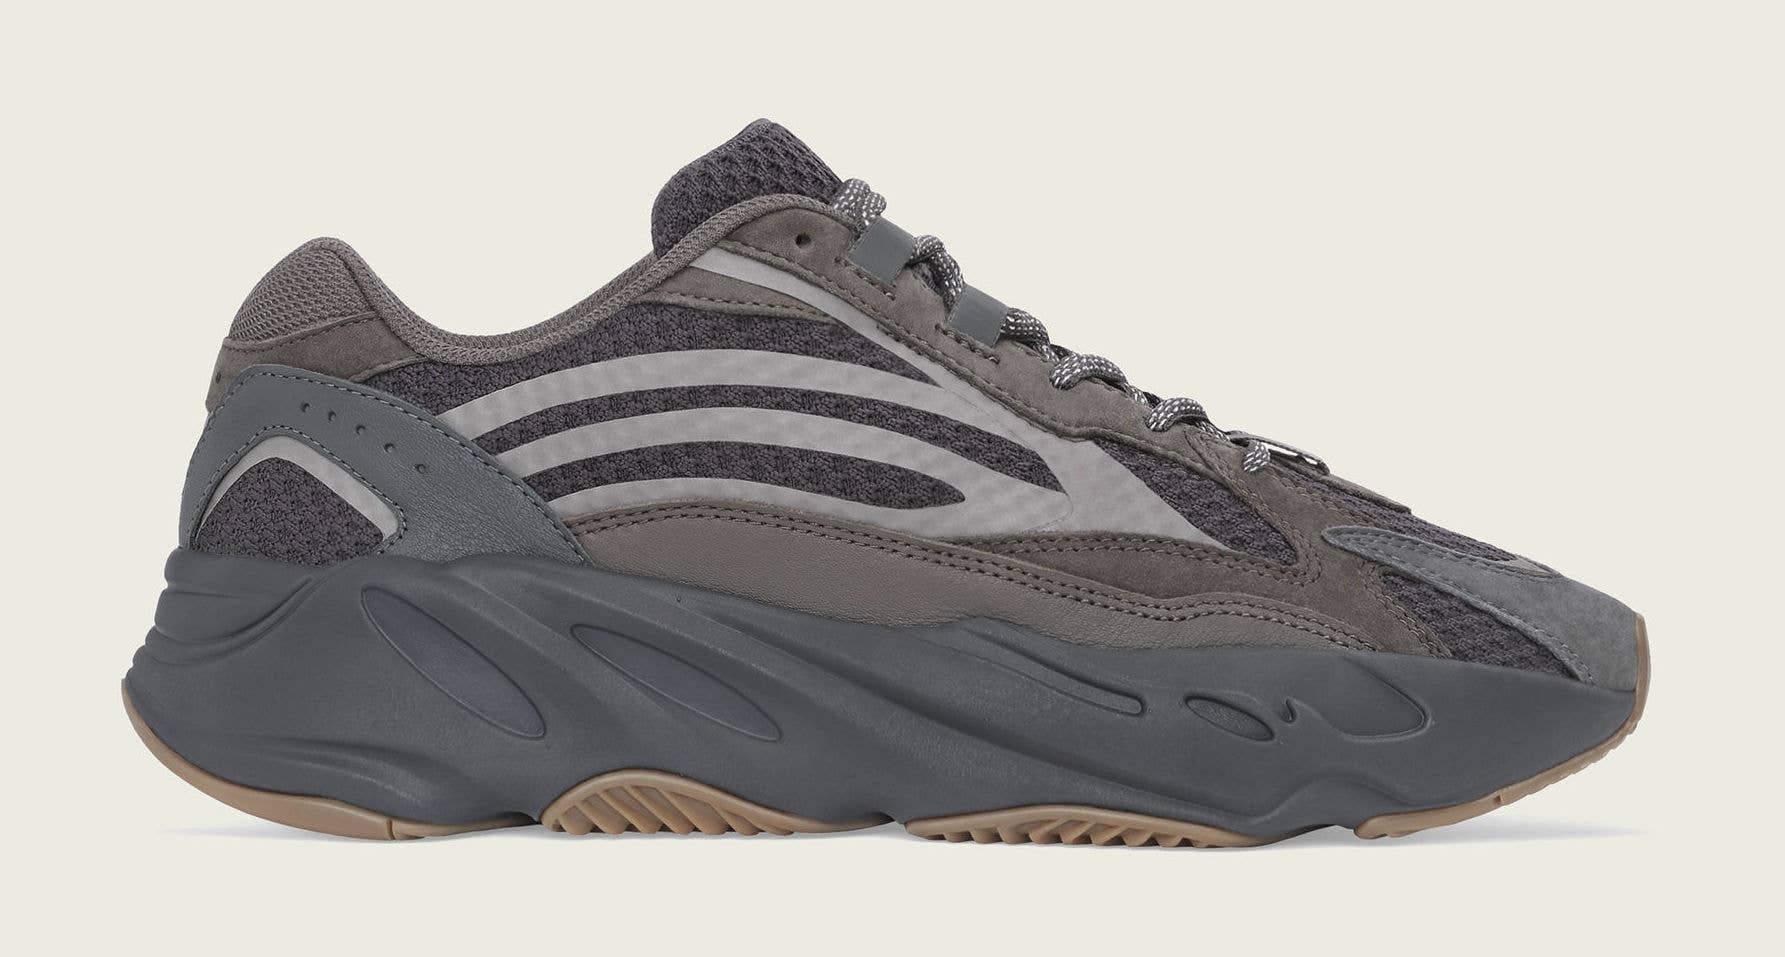 Official Look at 'Geode' Adidas Yeezy 700 V2 | Complex